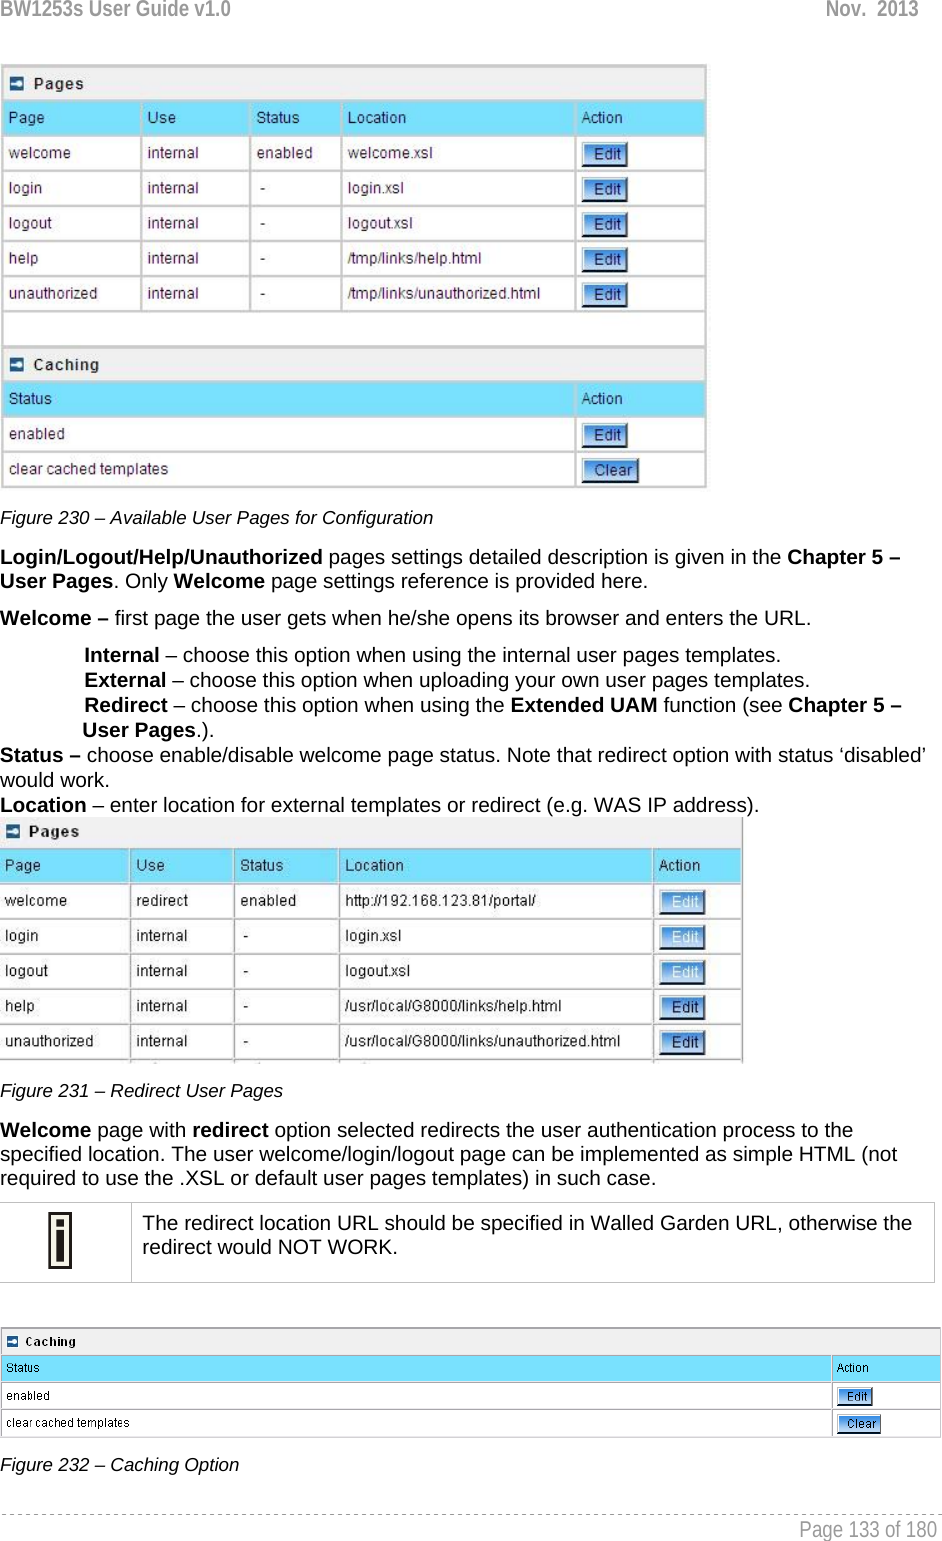 BW1253s User Guide v1.0  Nov.  2013     Page 133 of 180    Figure 230 – Available User Pages for Configuration Login/Logout/Help/Unauthorized pages settings detailed description is given in the Chapter 5 – User Pages. Only Welcome page settings reference is provided here. Welcome – first page the user gets when he/she opens its browser and enters the URL. Internal – choose this option when using the internal user pages templates. External – choose this option when uploading your own user pages templates. Redirect – choose this option when using the Extended UAM function (see Chapter 5 – User Pages.). Status – choose enable/disable welcome page status. Note that redirect option with status ‘disabled’ would work. Location – enter location for external templates or redirect (e.g. WAS IP address).  Figure 231 – Redirect User Pages  Welcome page with redirect option selected redirects the user authentication process to the specified location. The user welcome/login/logout page can be implemented as simple HTML (not required to use the .XSL or default user pages templates) in such case.  The redirect location URL should be specified in Walled Garden URL, otherwise the redirect would NOT WORK.   Figure 232 – Caching Option 